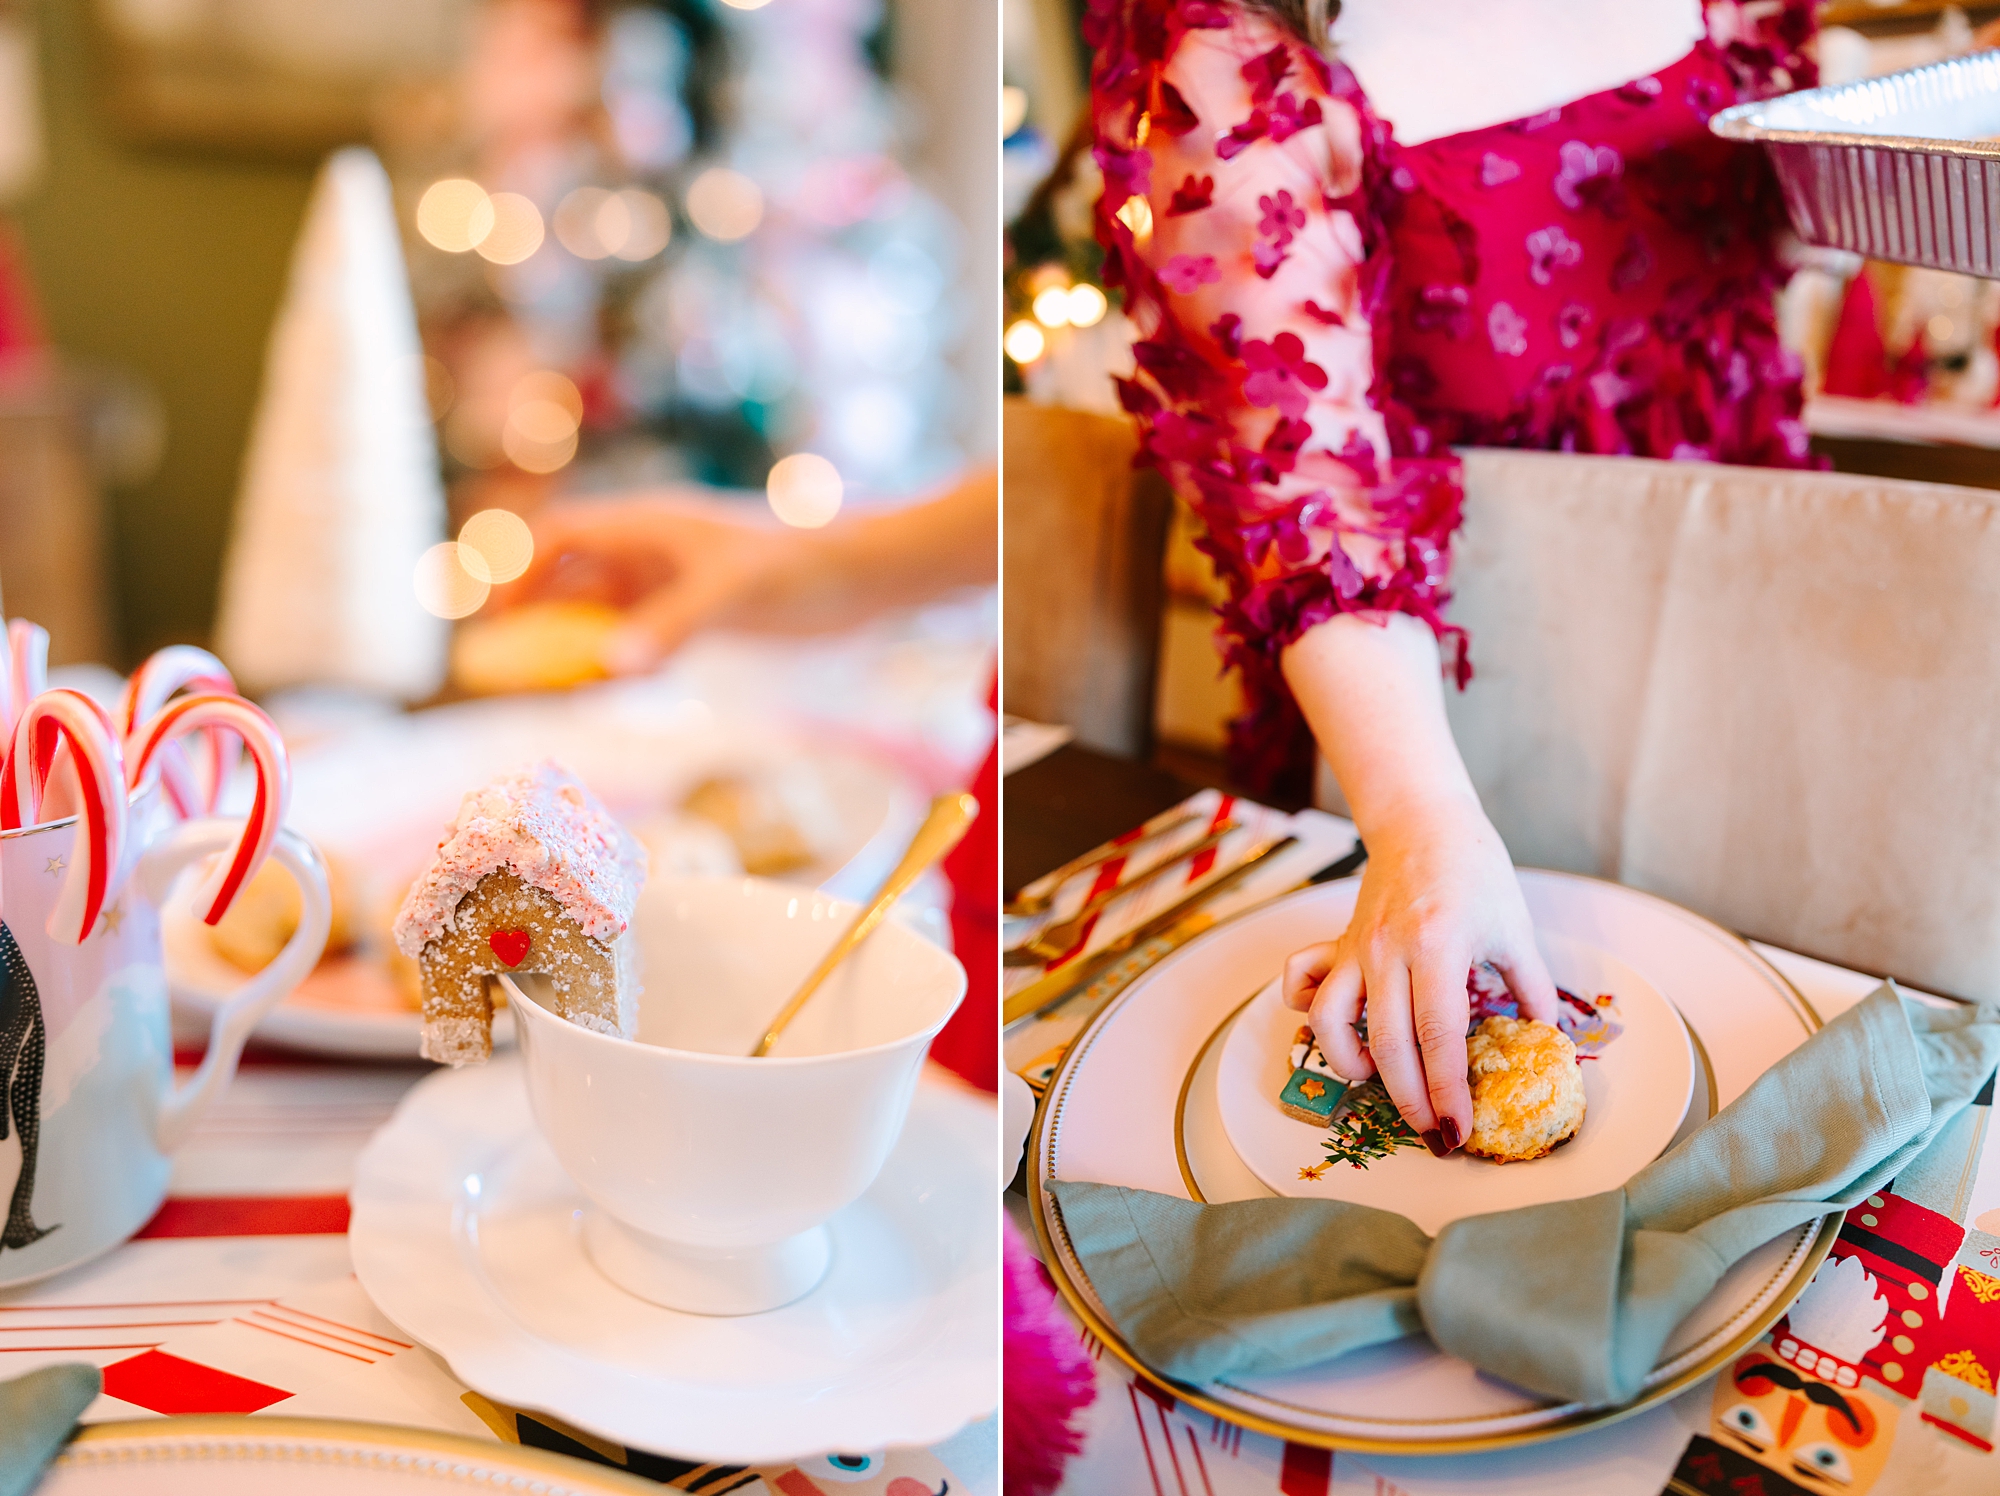 owner of Pretty Lovely Tea sets out cookies during winter branding photos